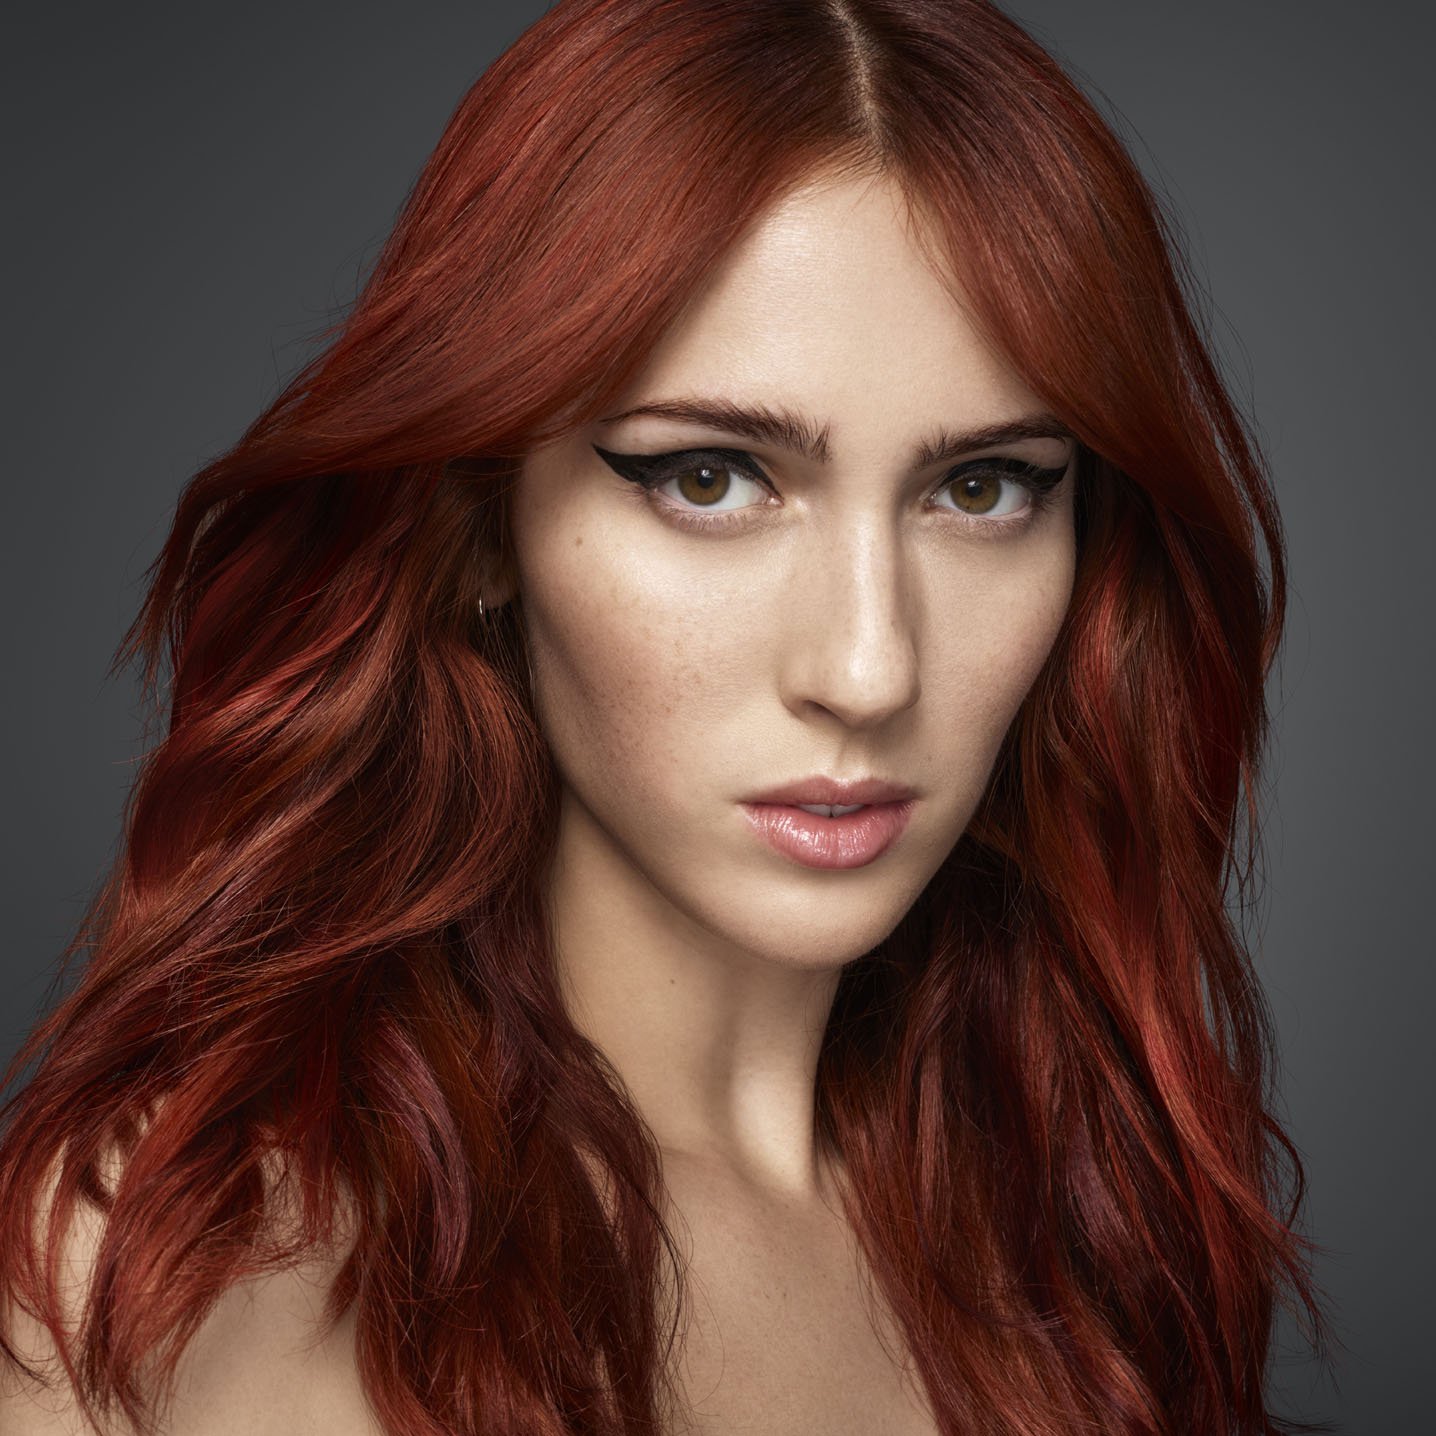 Why You Should Dye Your Hair Red - Haircolor - Redken Report - Redken